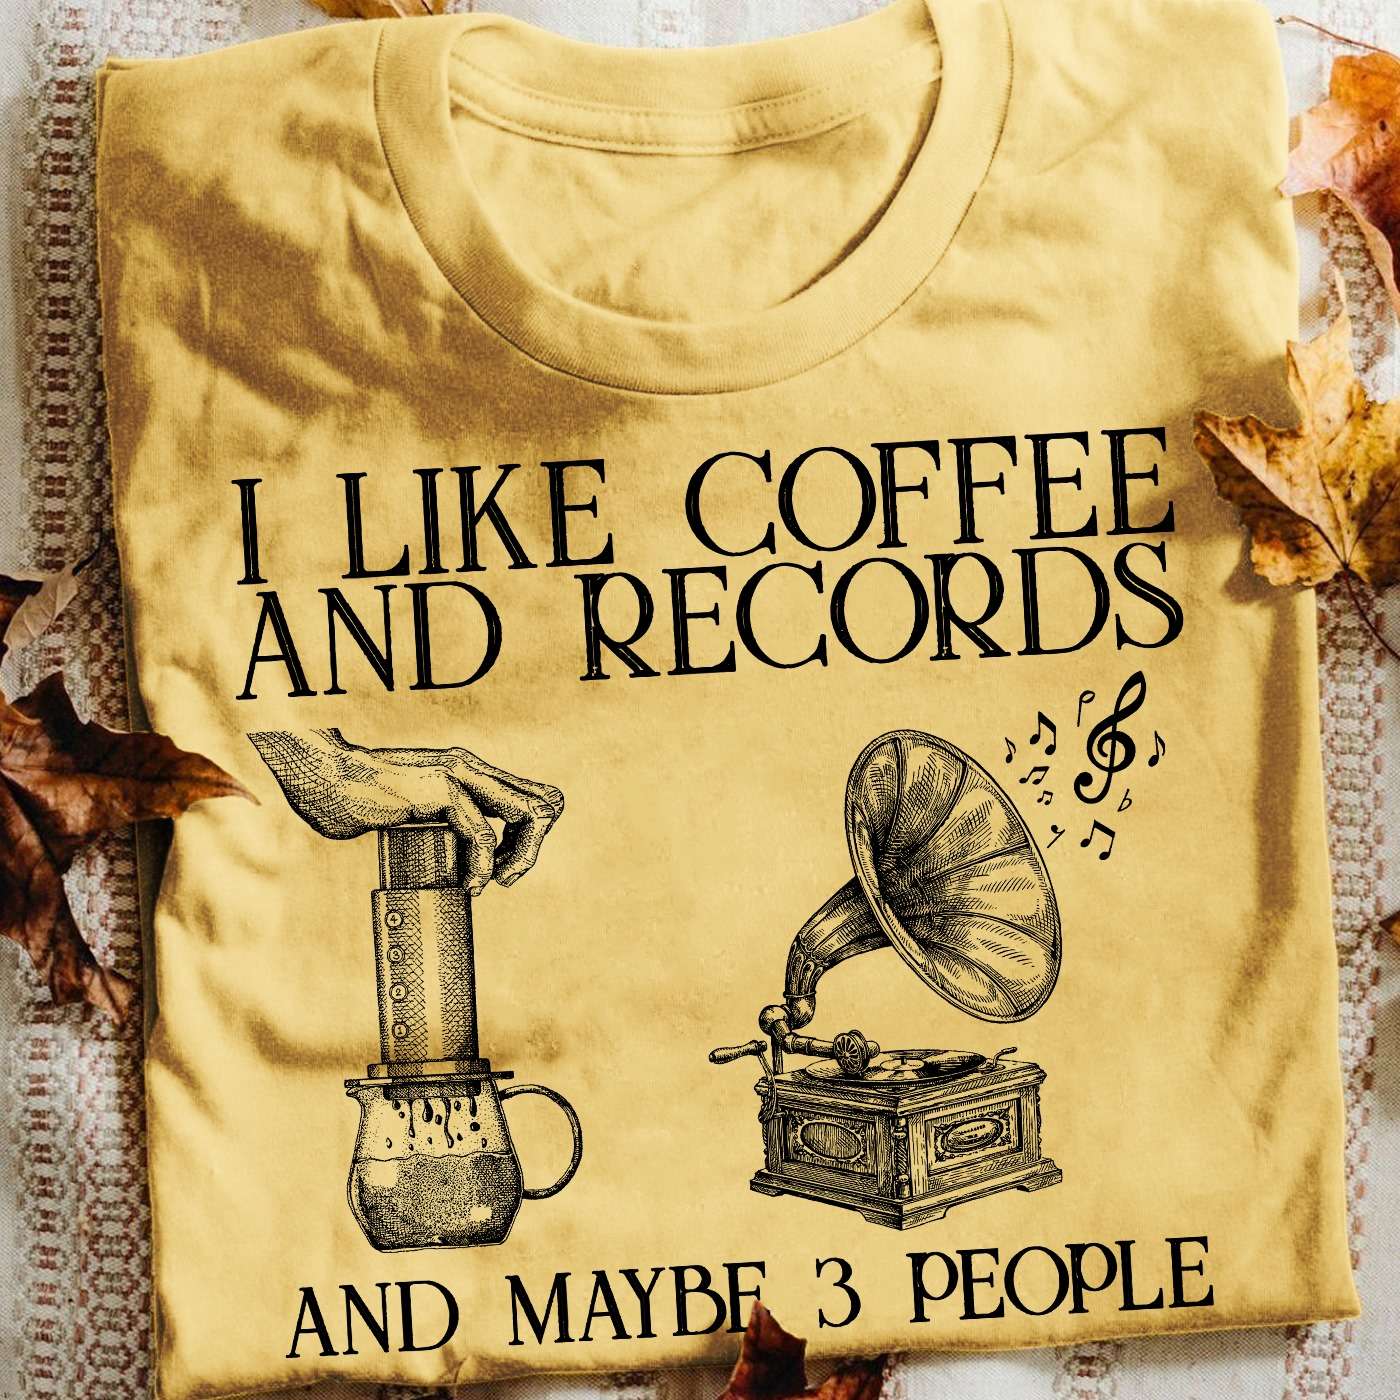 I like coffee and records and maybe 3 people - Vinyls record